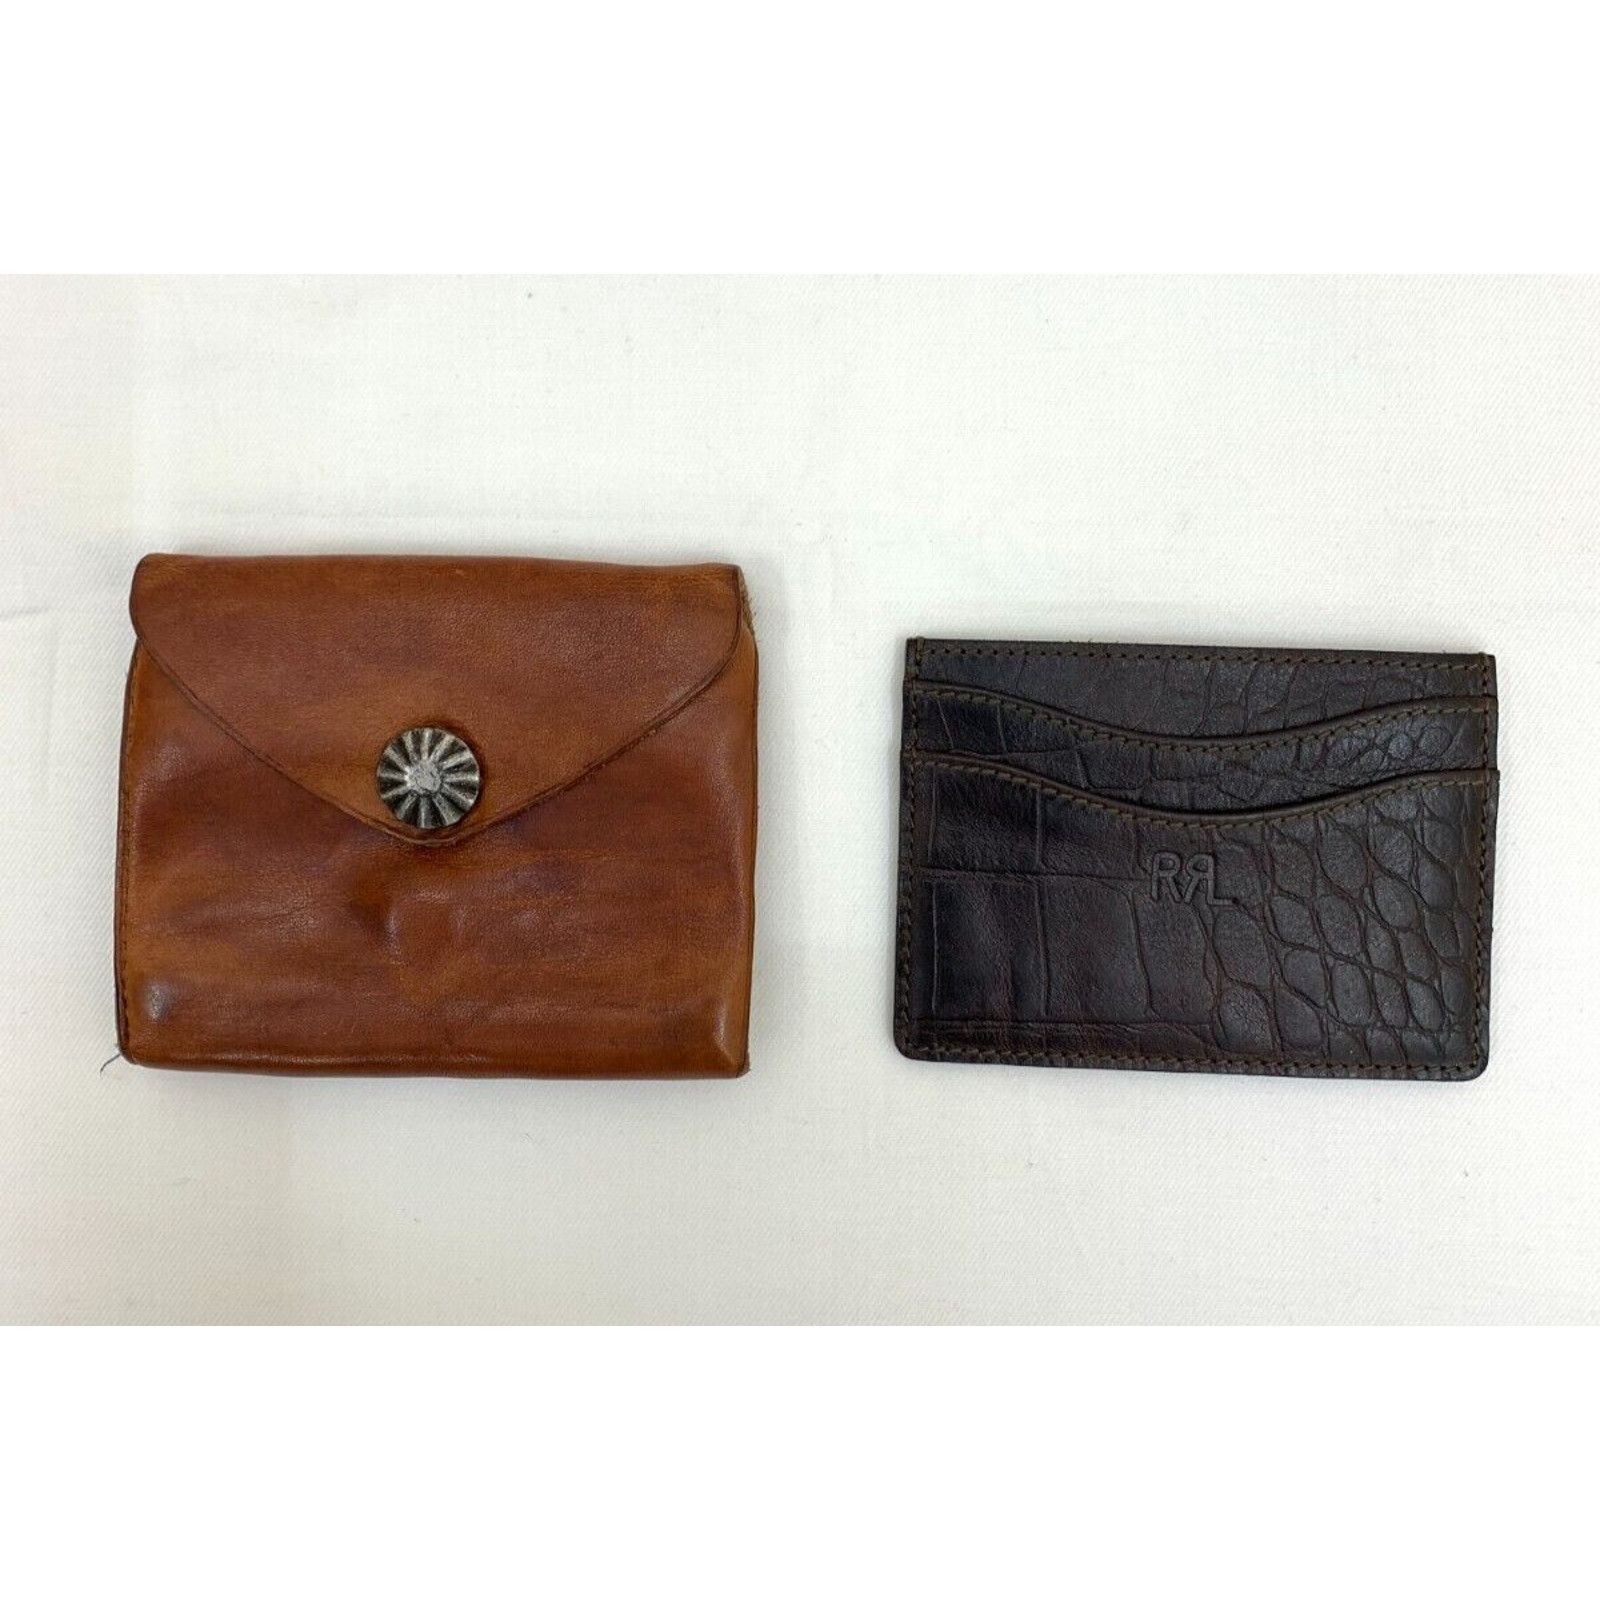 Double RL Tumbled Leather Card Wallet RRL Ralph Lauren Concho Card